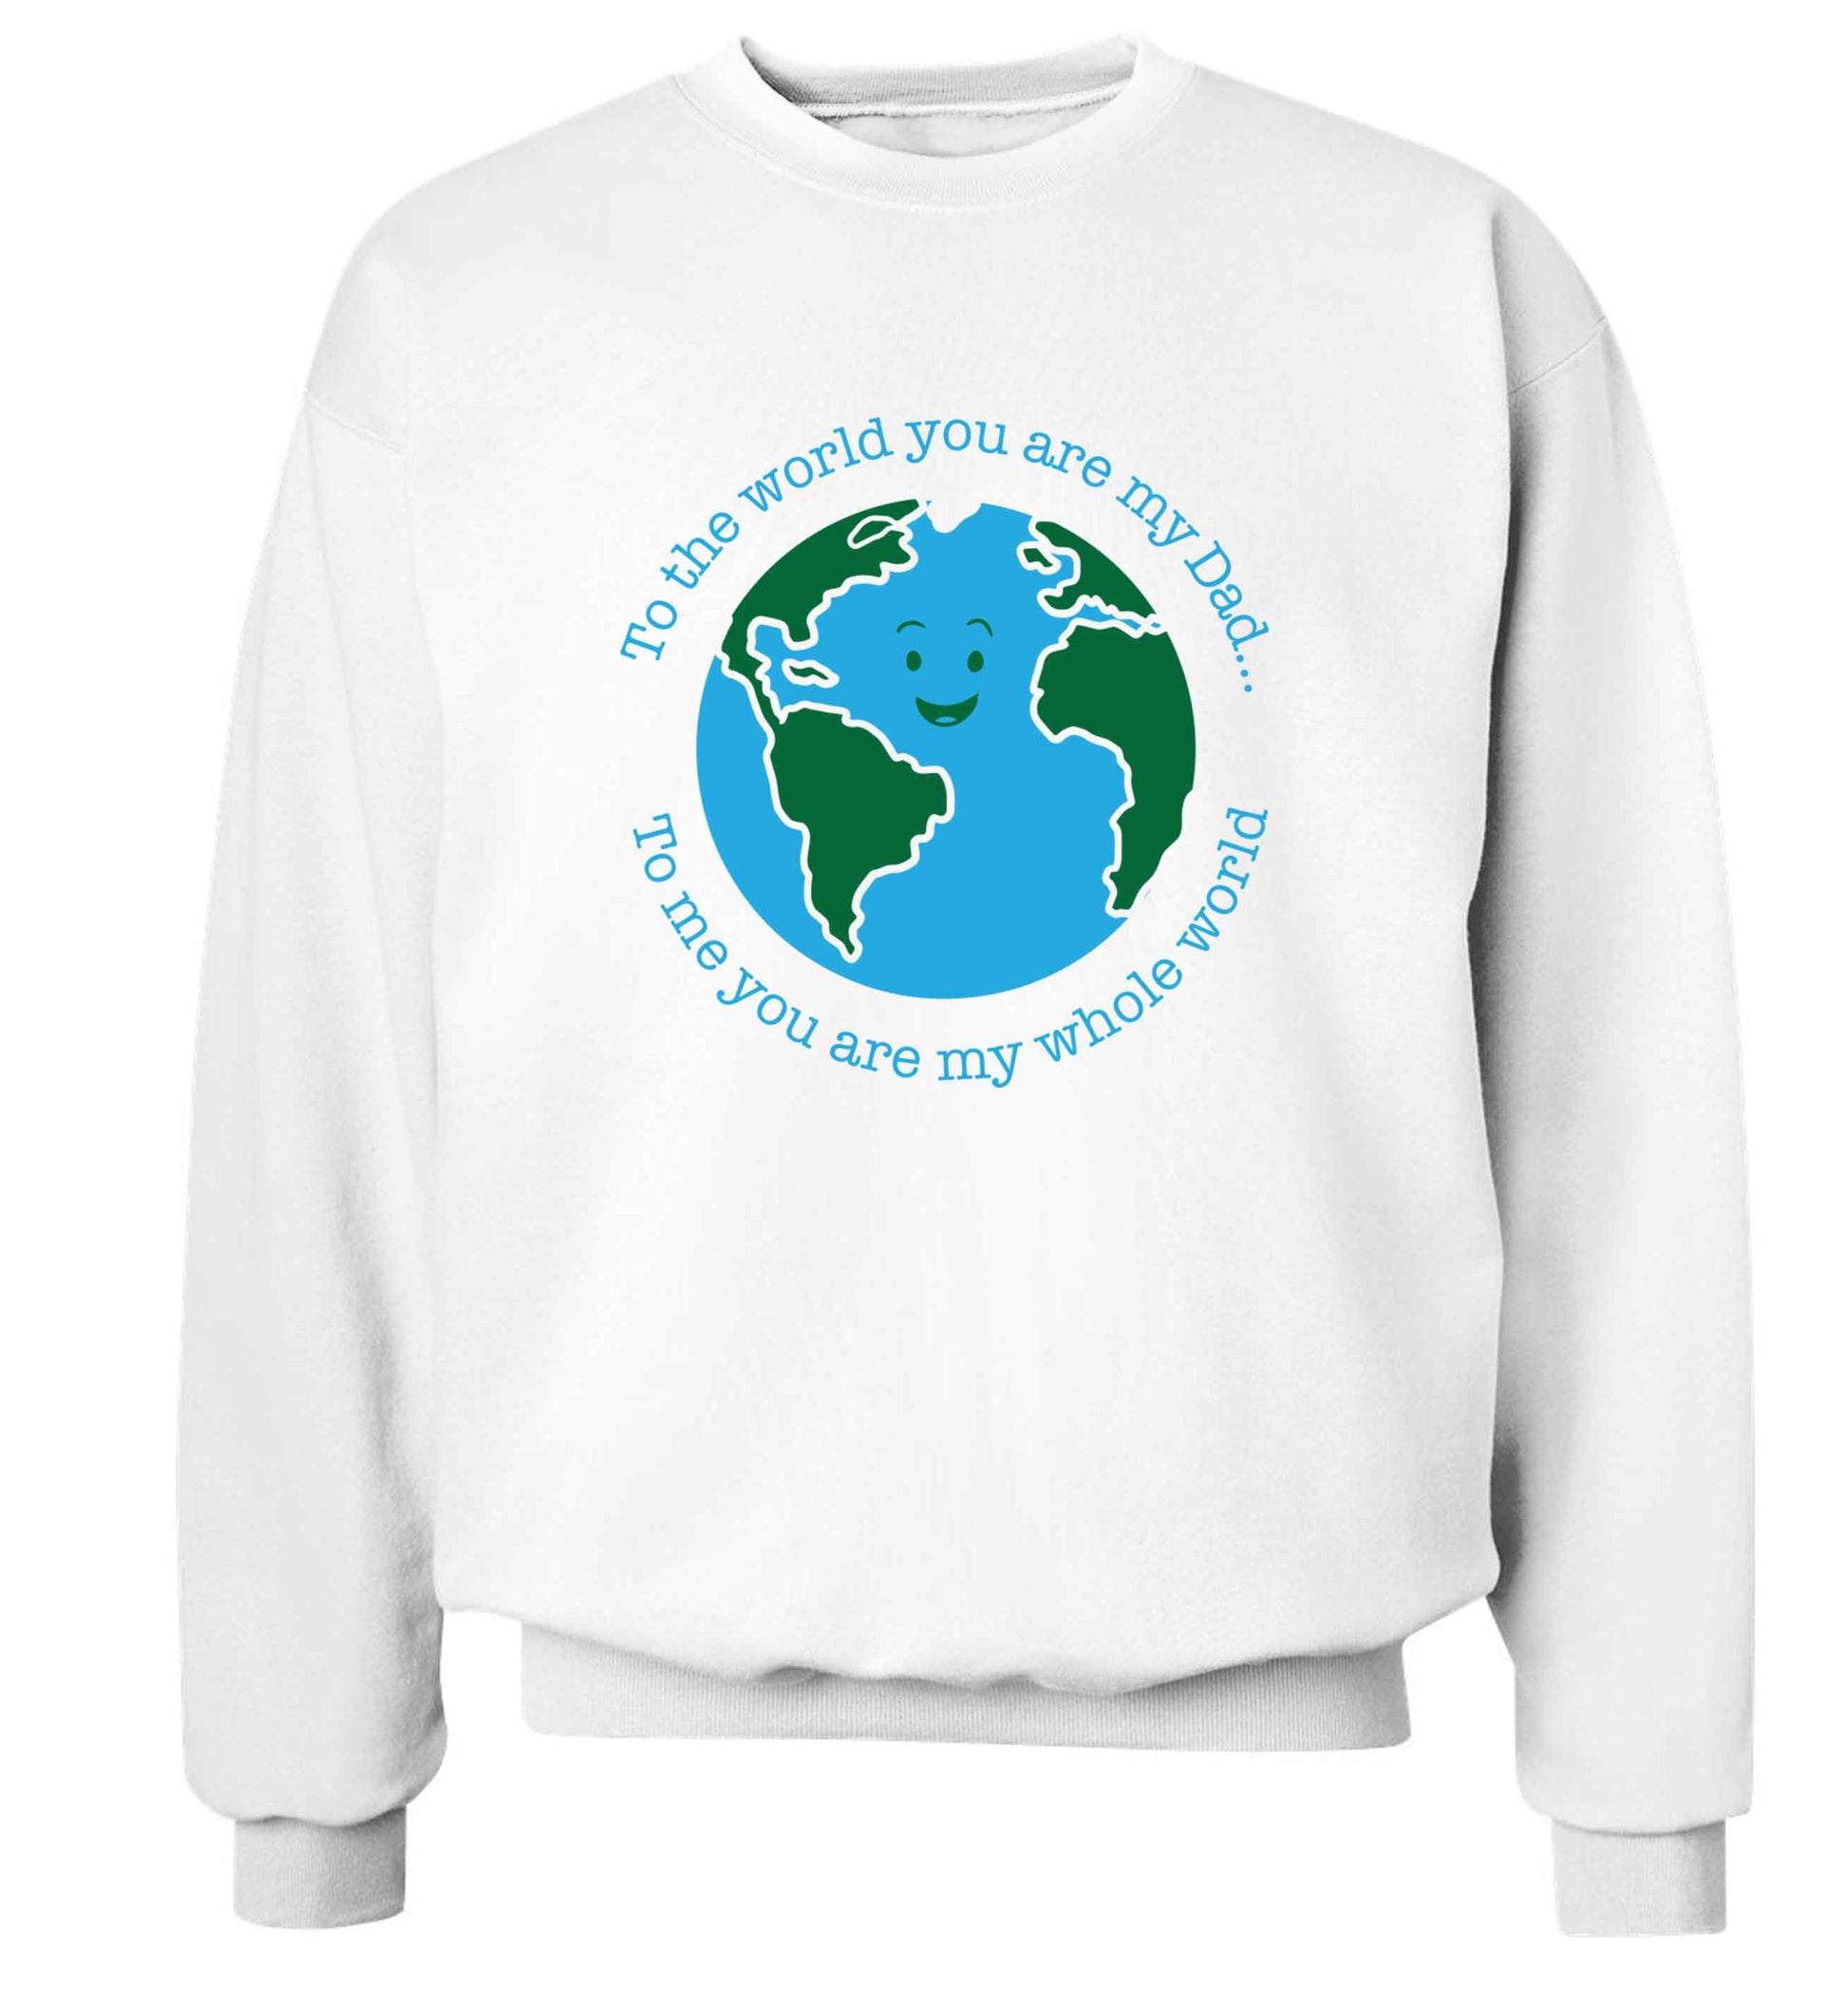 To the world you are my dad, to me you are my whole world adult's unisex white sweater 2XL